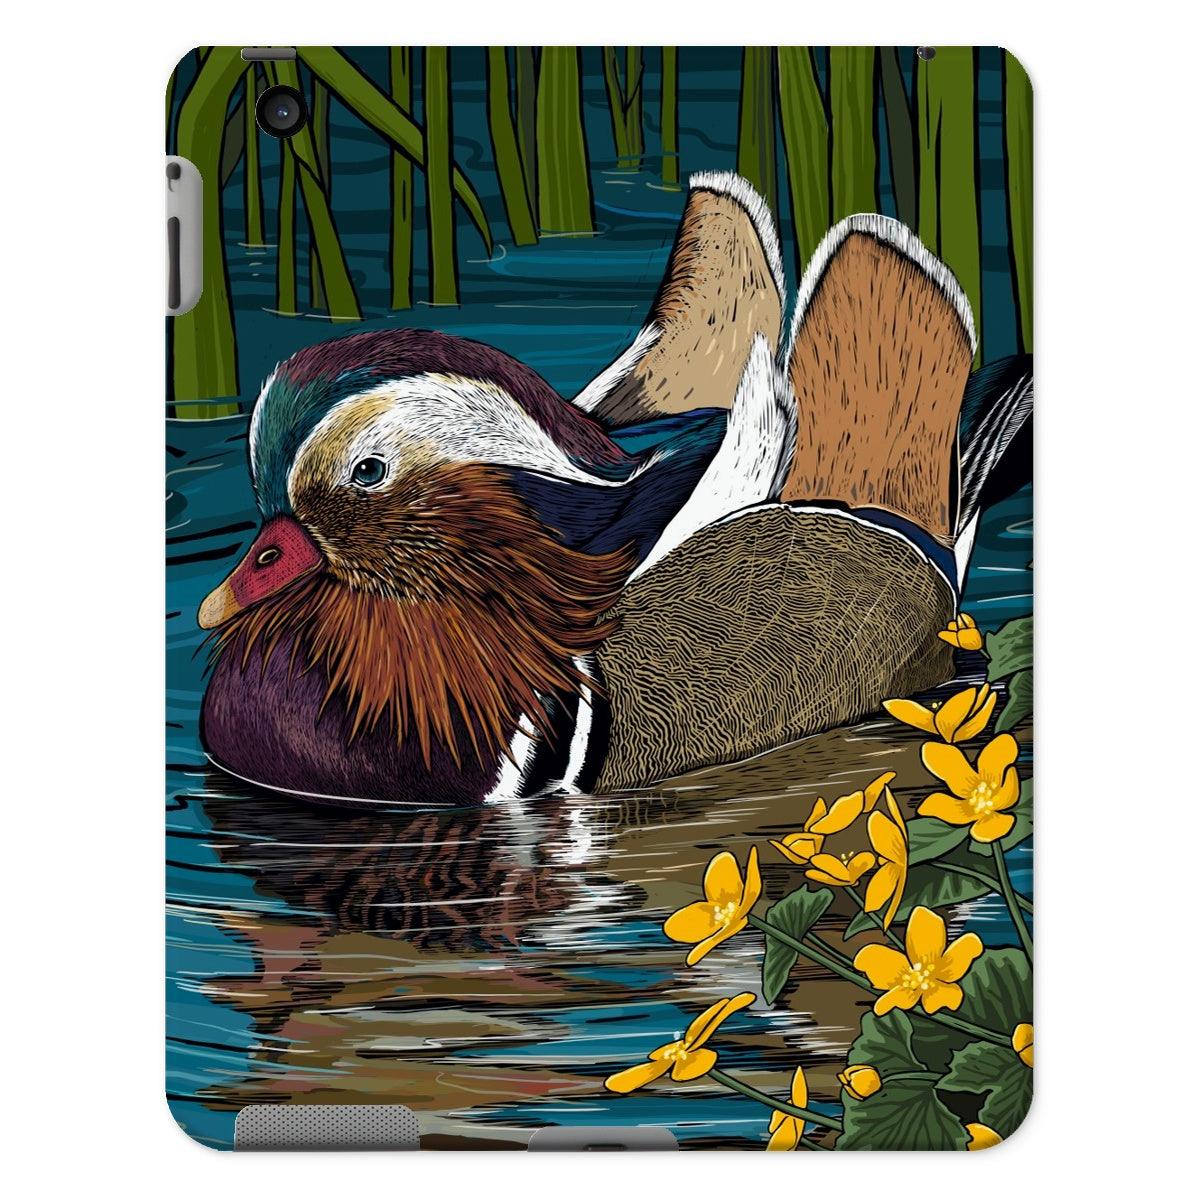 Mandarin and Marigolds design on a tough, shatterproof tablet case by Fox and Boo